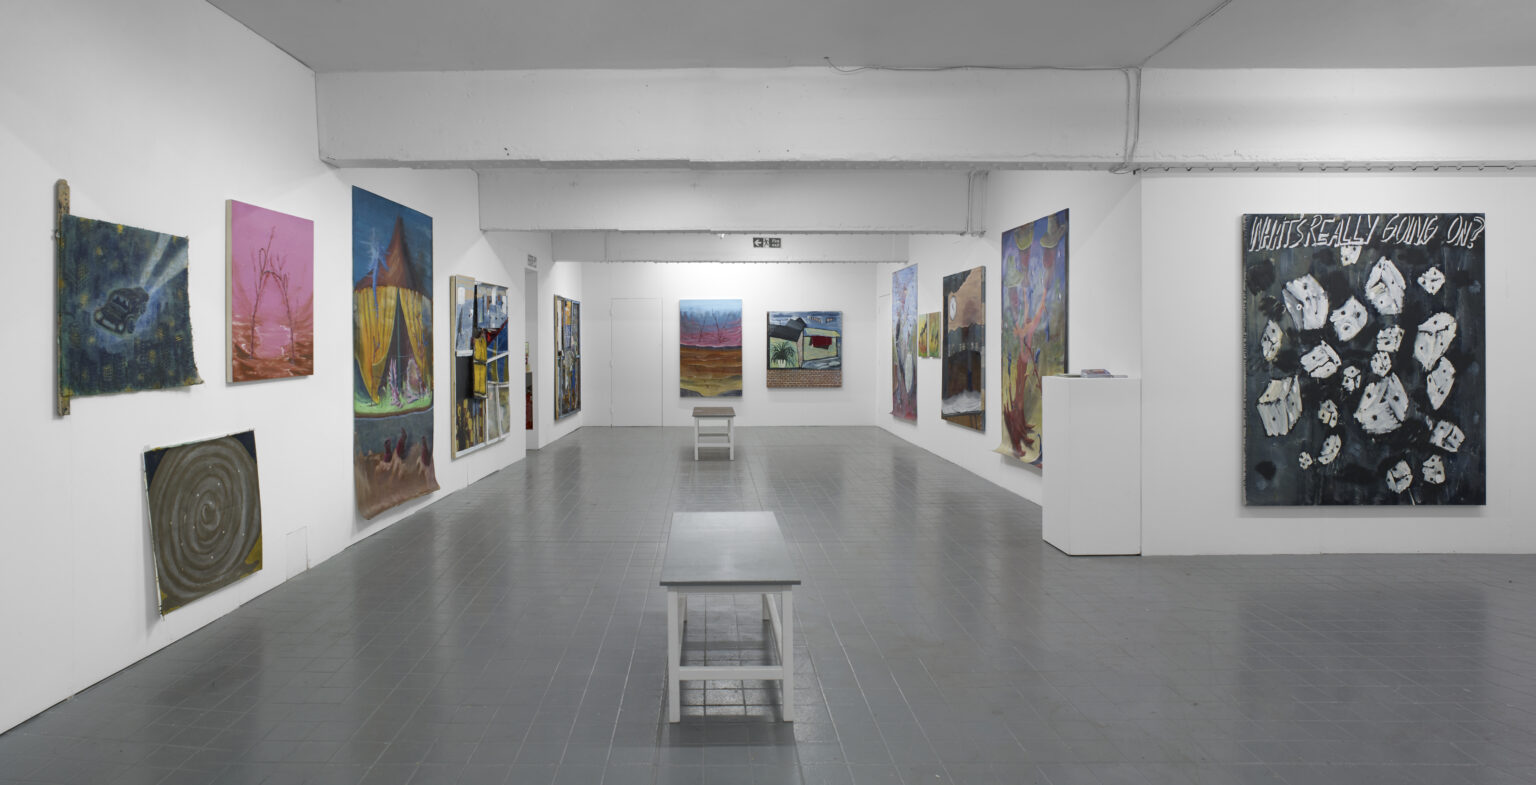 A white cube gallery space is filled with a collection of brightly coloured paintings of different sizes on canvas an paper.